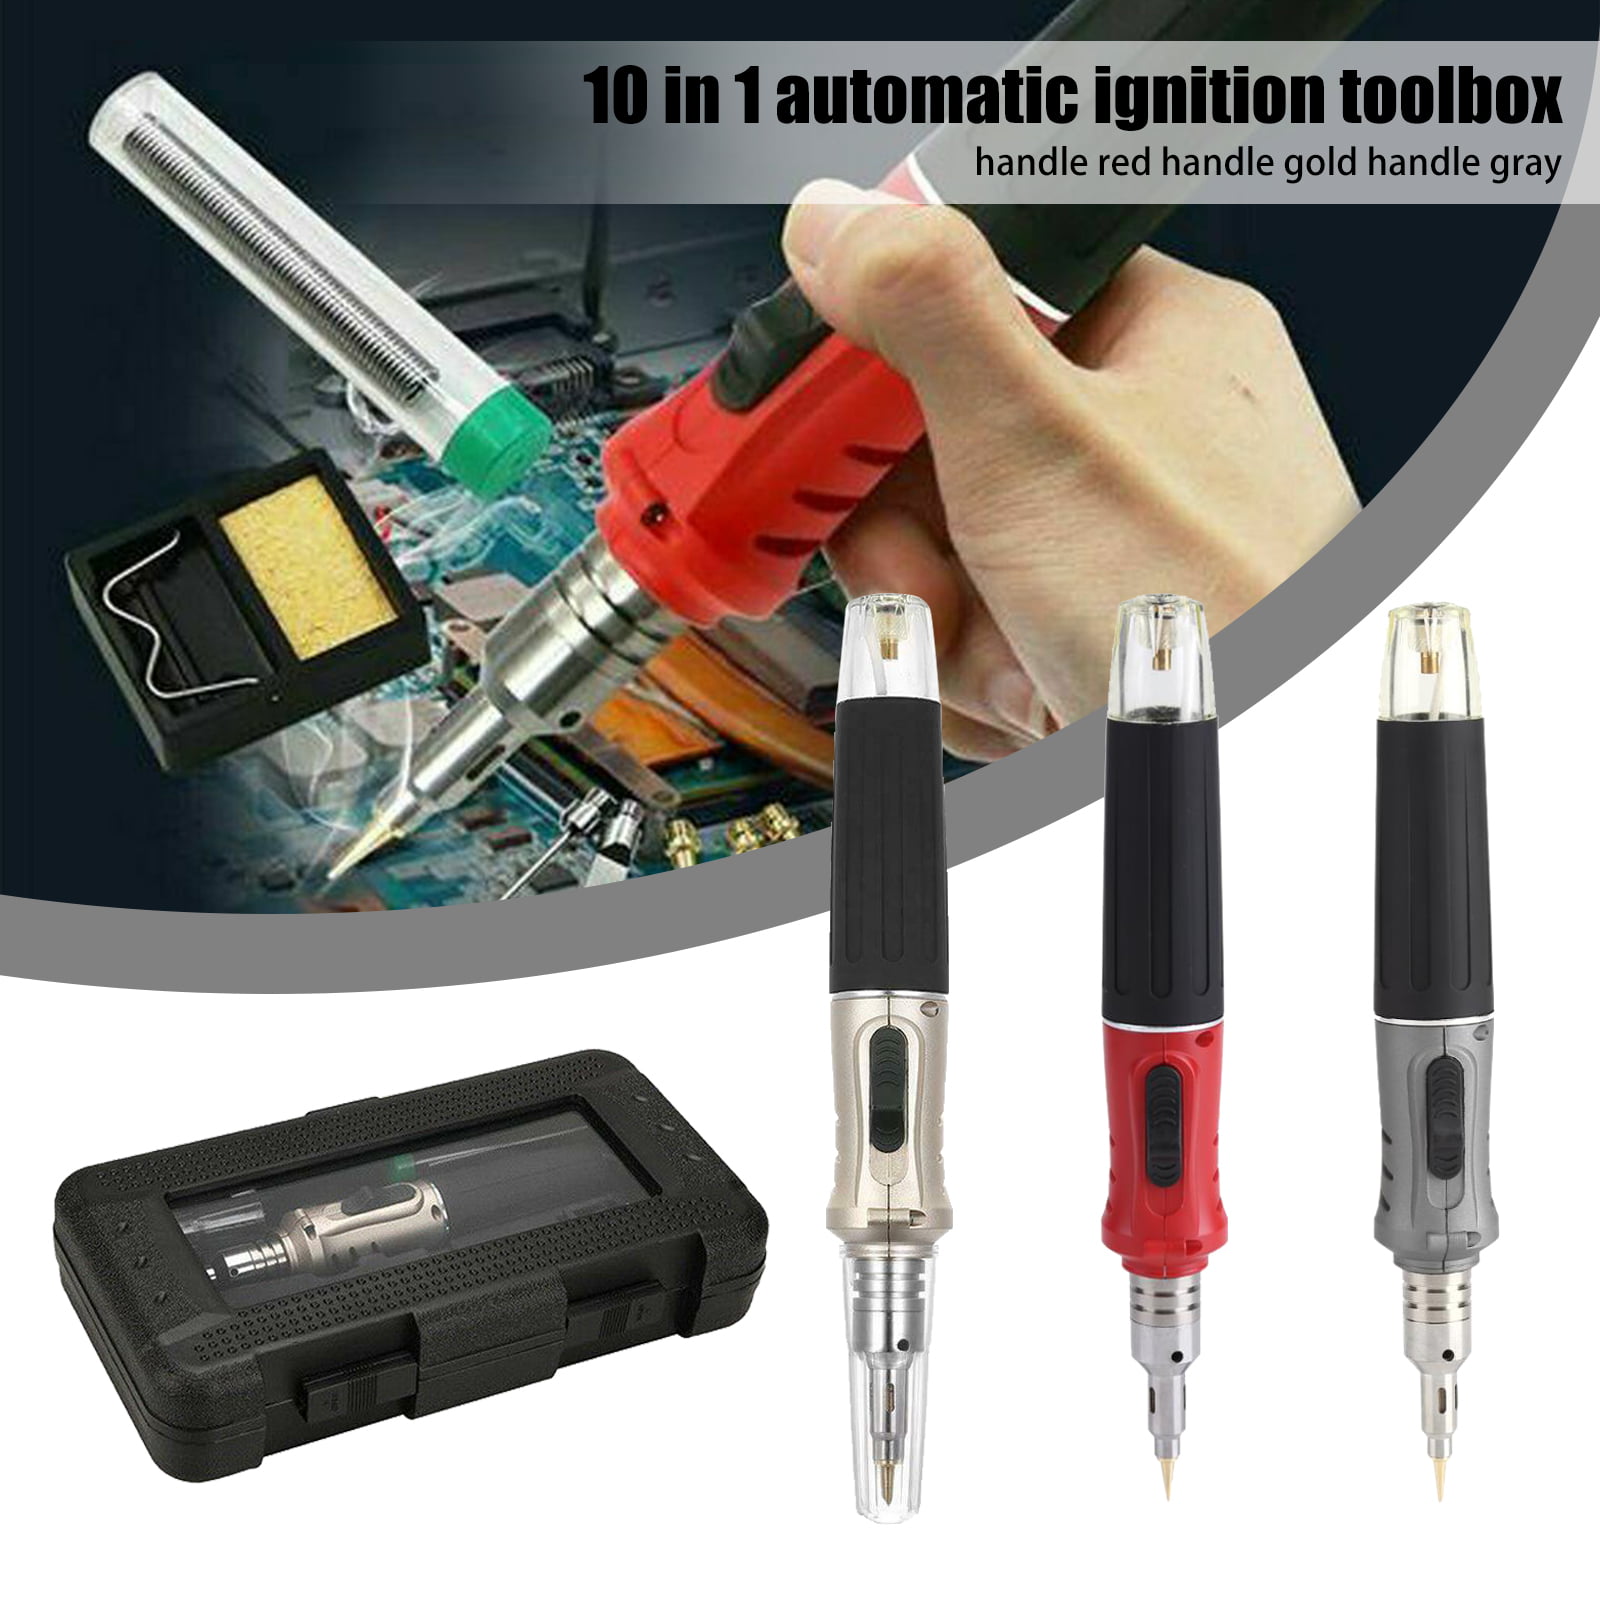 Portable Gas Soldering Iron 3In1 Kit Butane Ignite Welding Torch Tool with Case 